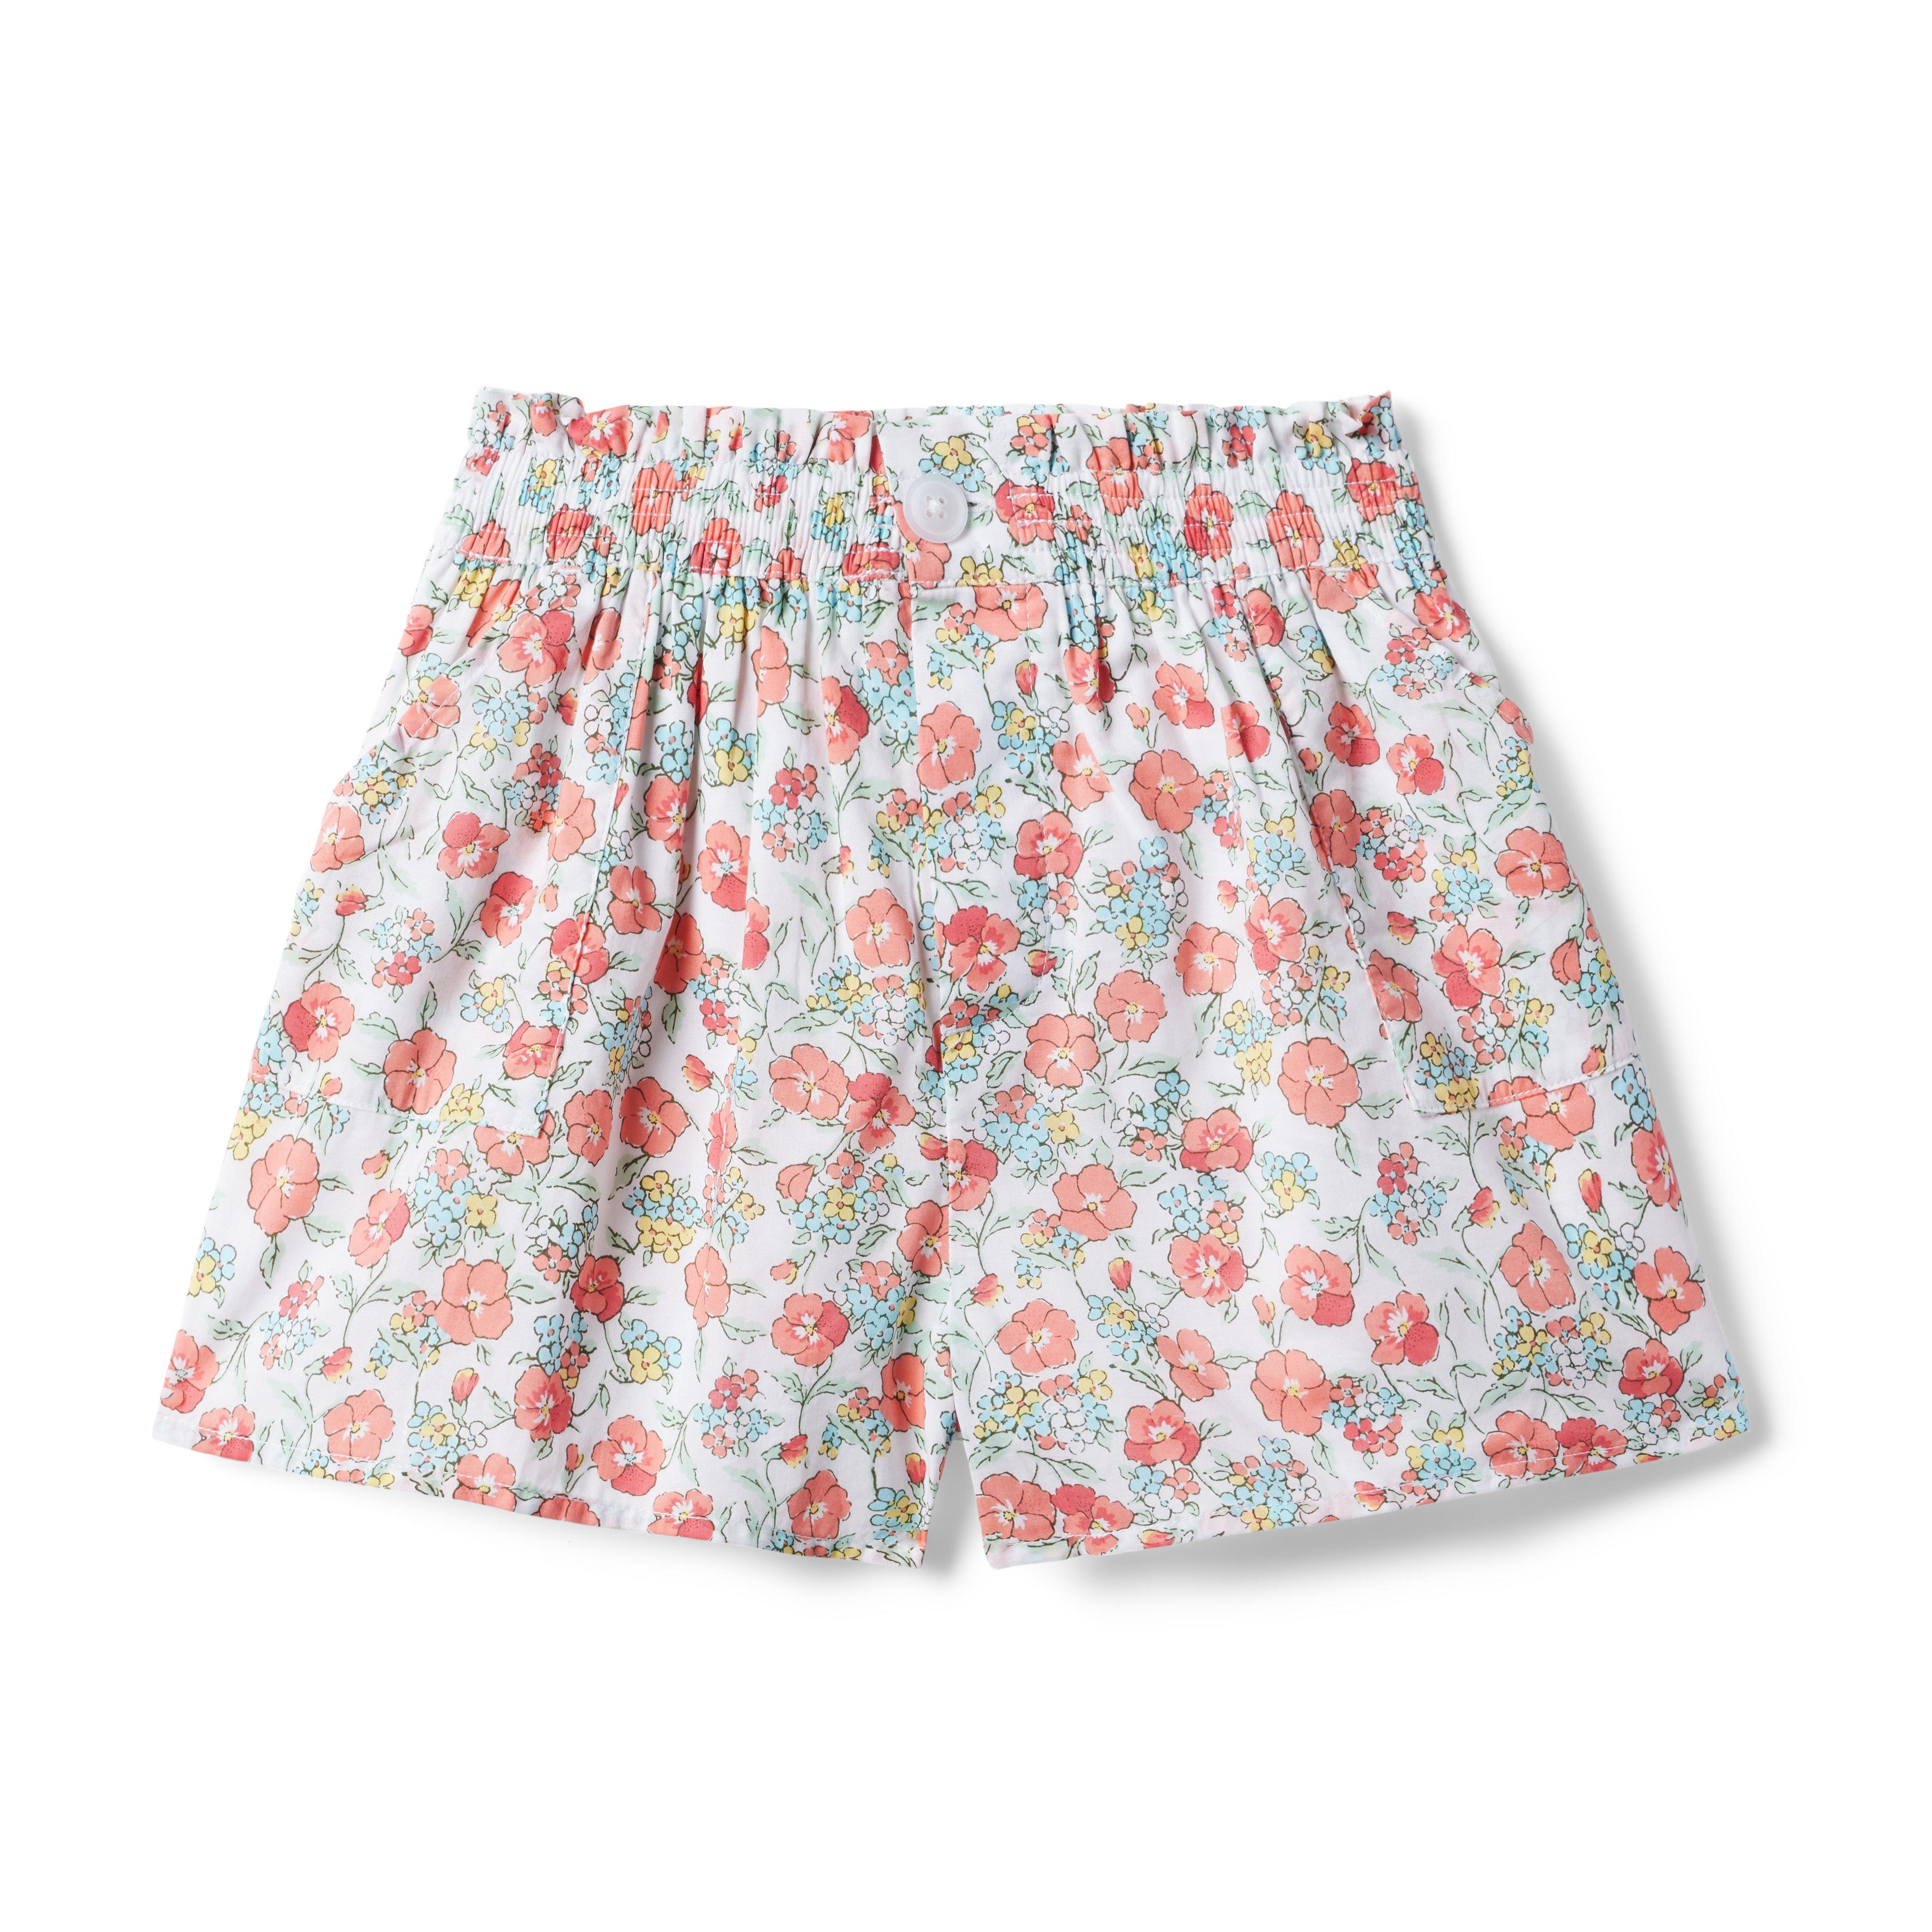 Tween Salmon Rose Floral Floral Smocked Waist Short by Janie and Jack